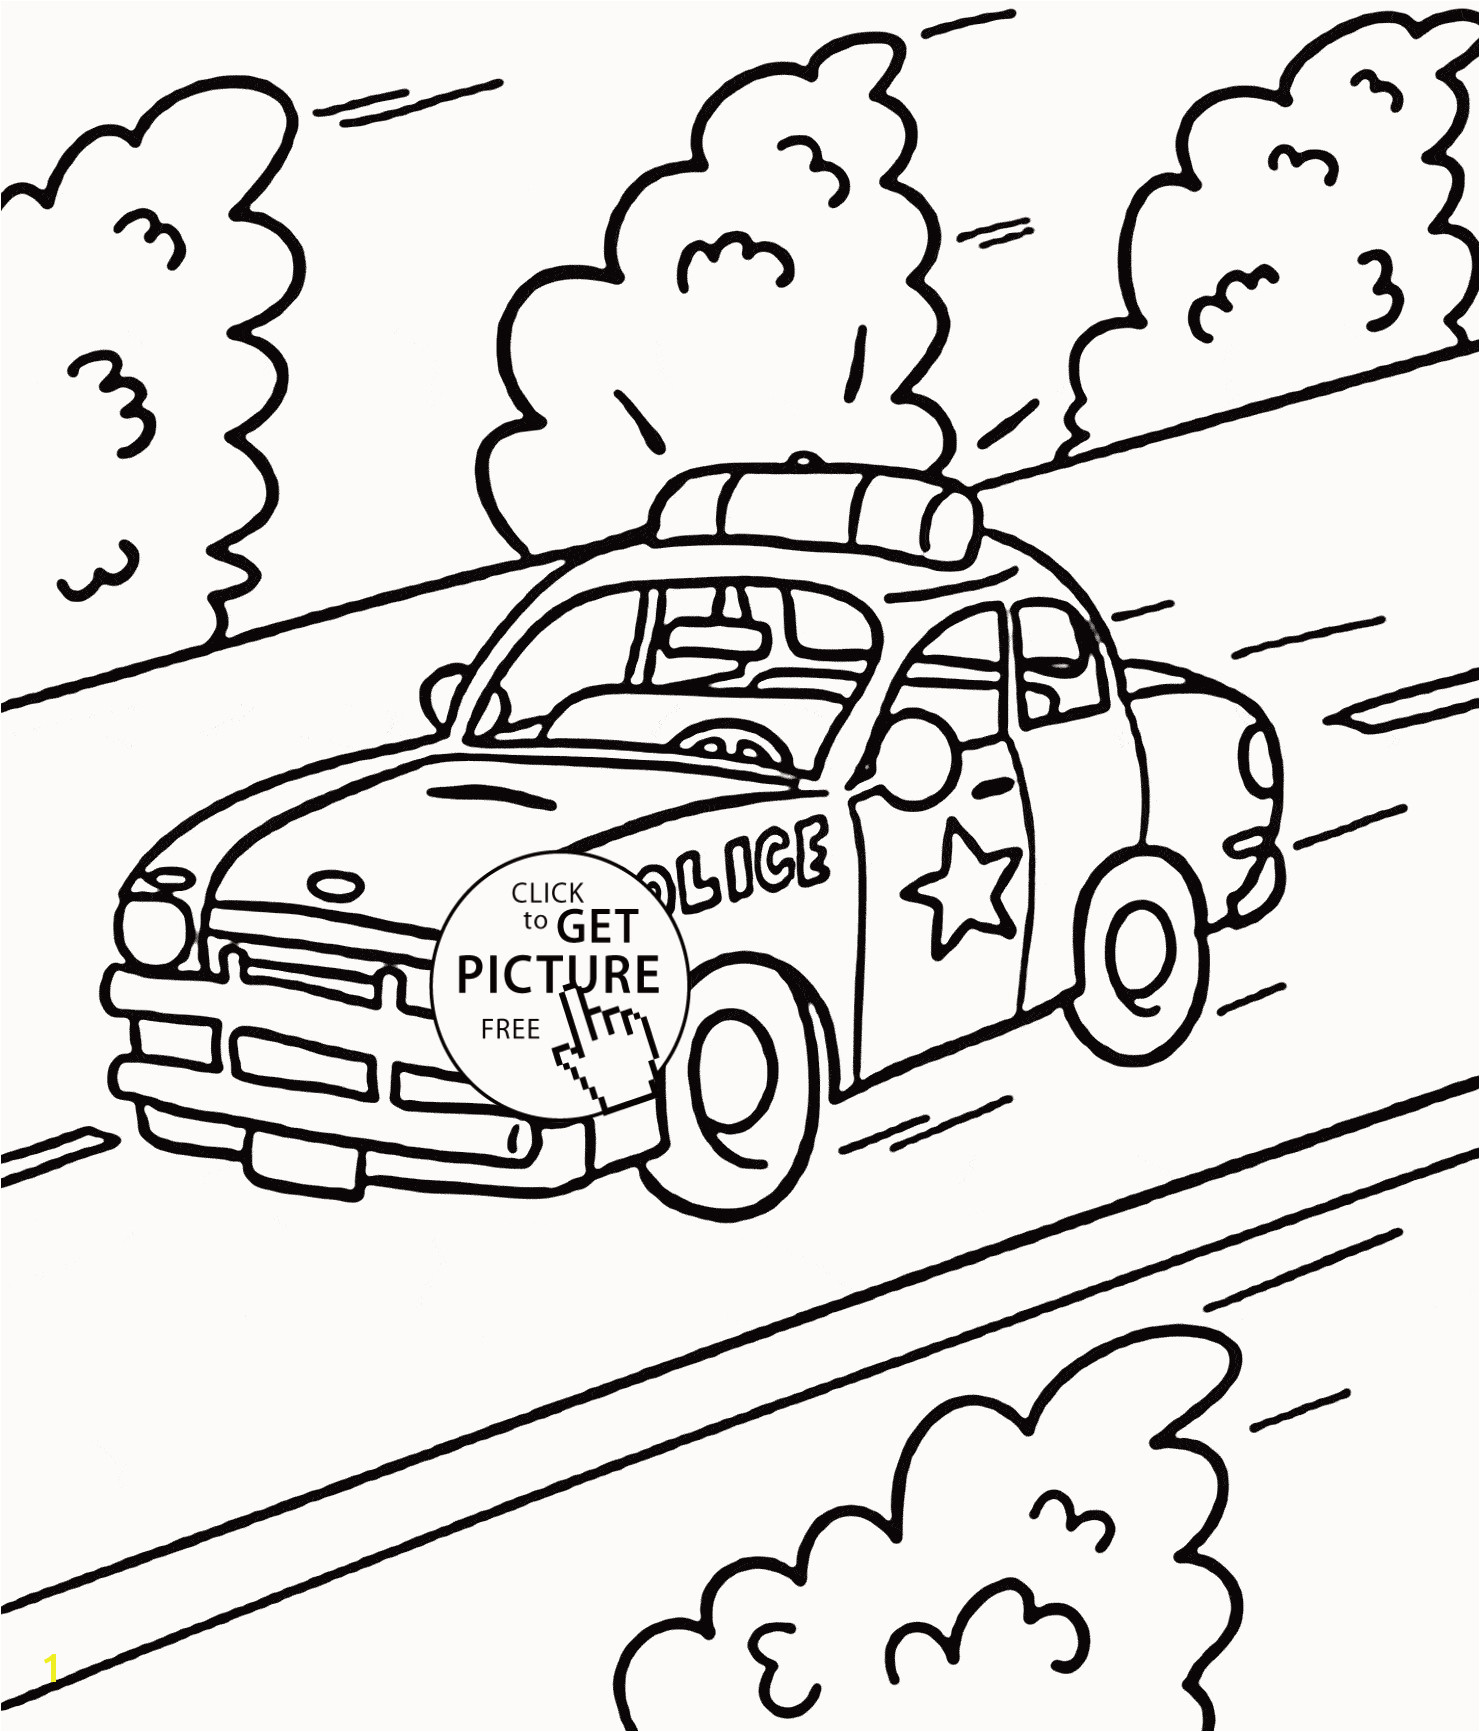 Swat Team Coloring Pages Swat Team Coloring Pages Lovely Lego forest Police Coloring Pages